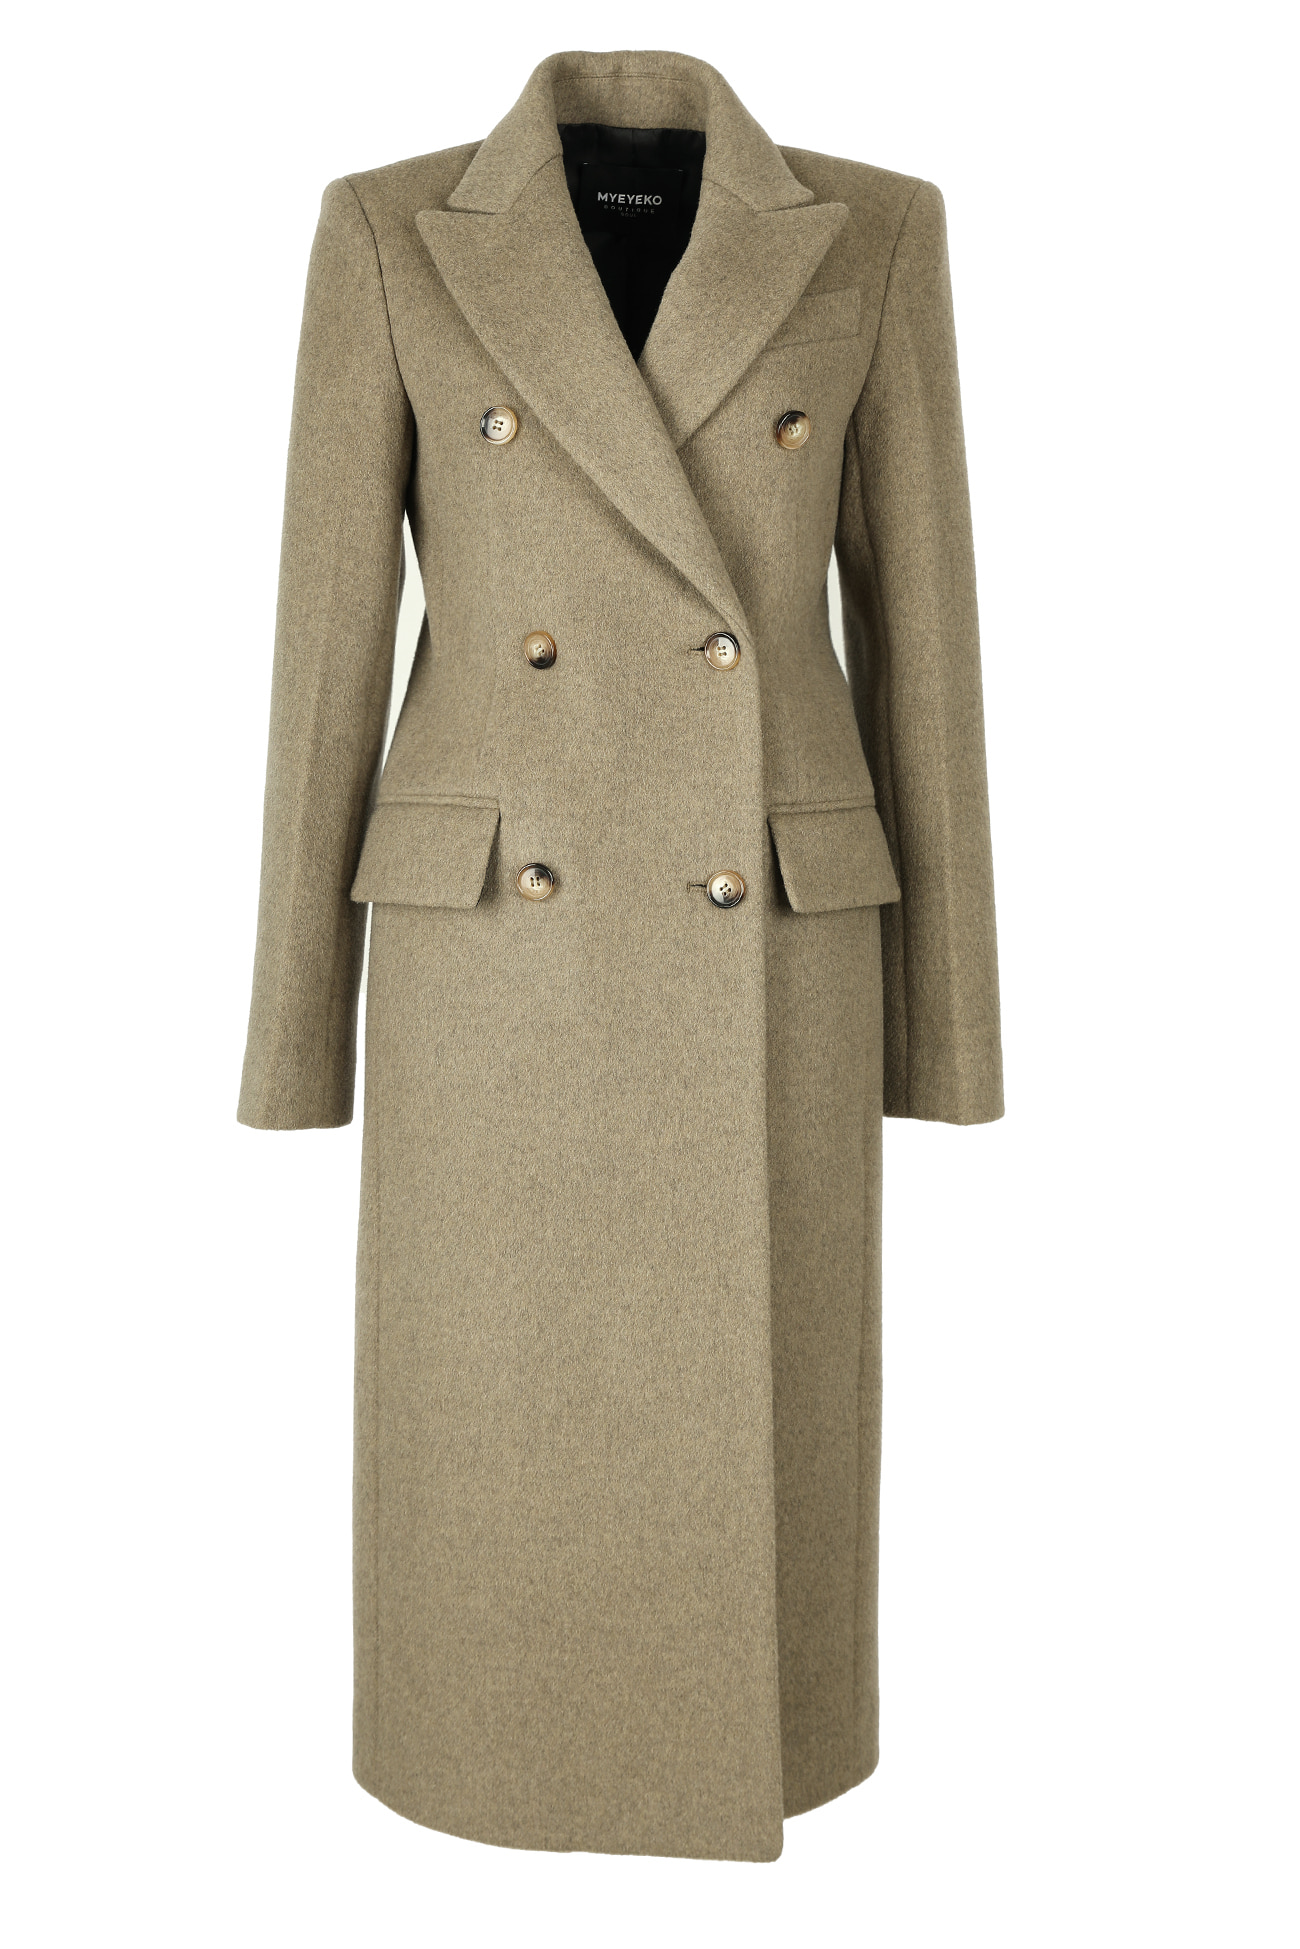 HIGH QUALITY LINE - Tailored Wool and Cashmere Coat (MOSS GREEN)